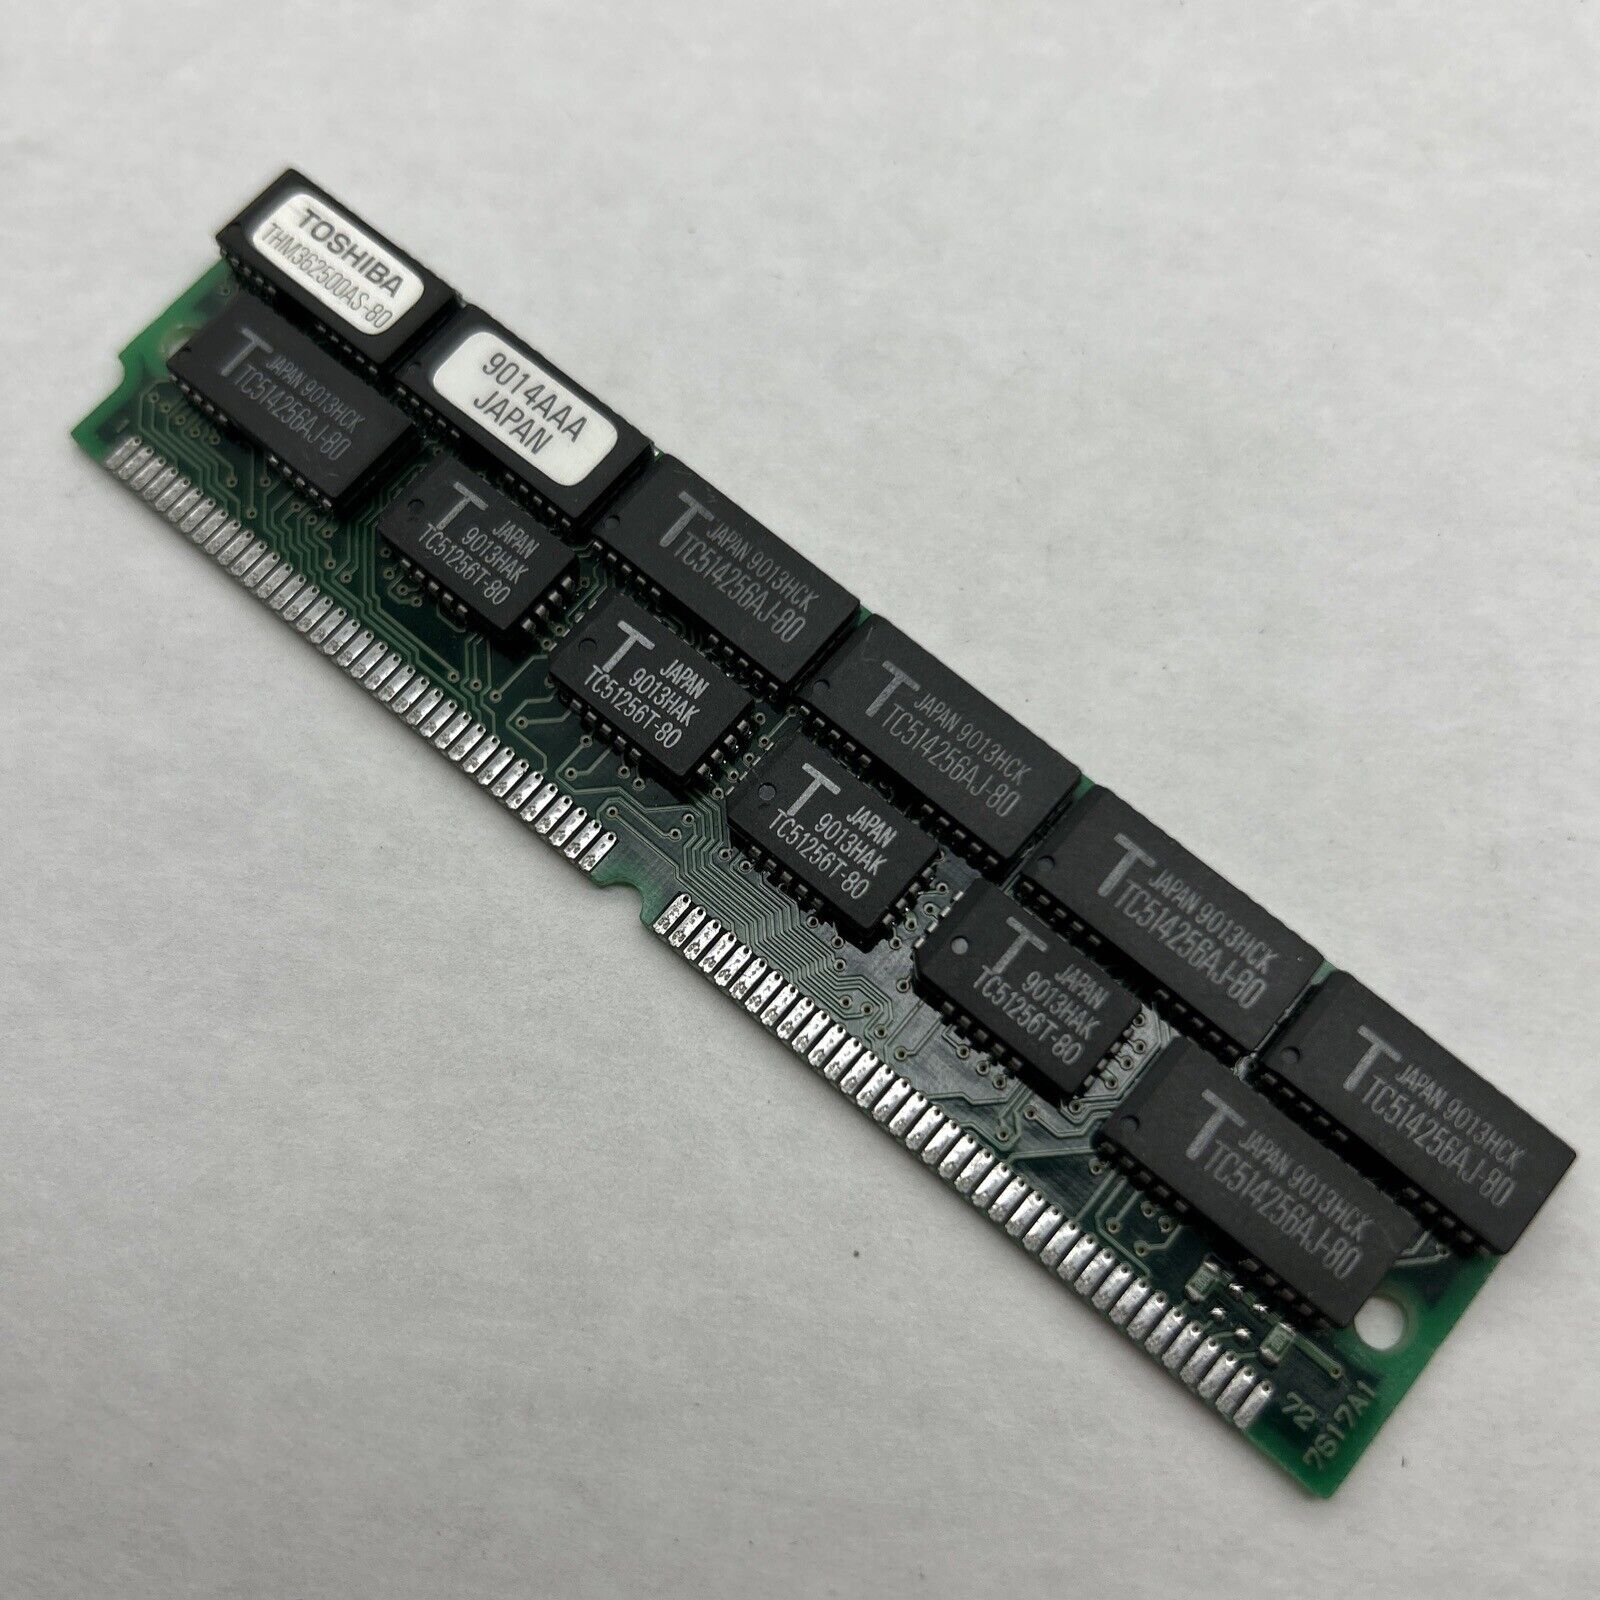 1MB Fast Page SIMM 72-PIN FPM Parity 80ns Memory 256x36 Rare Collectible